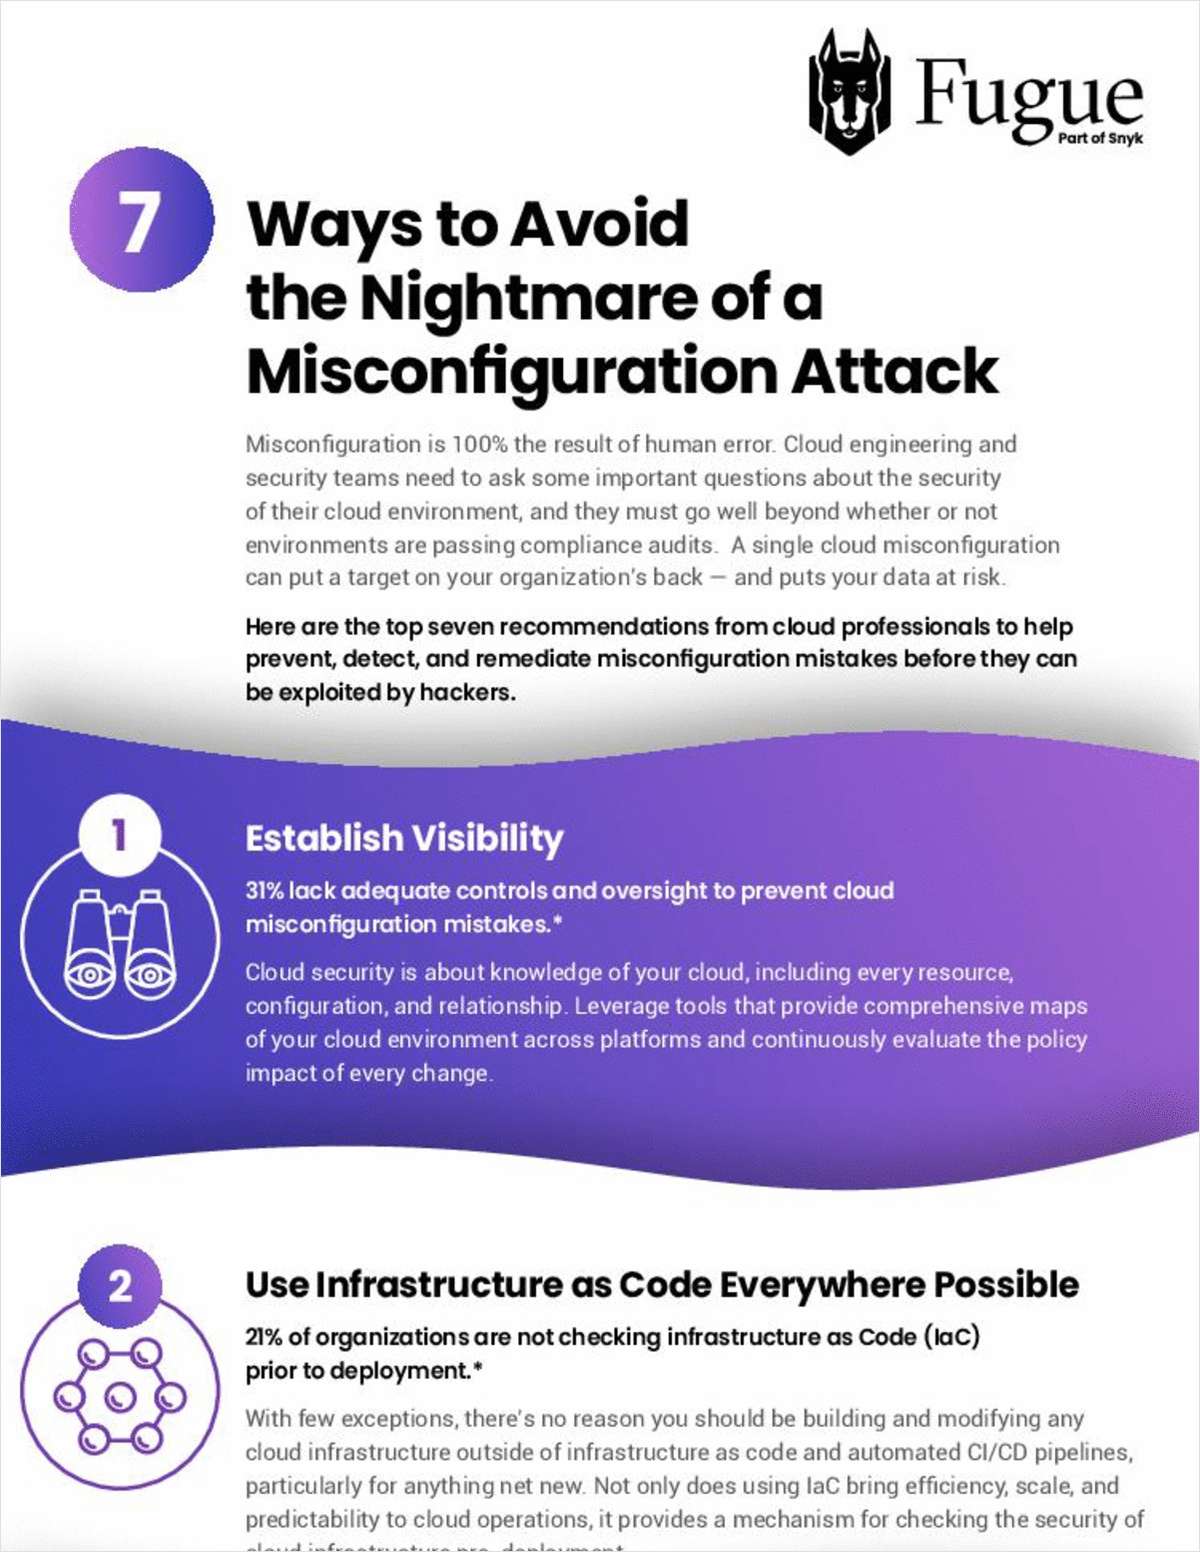 Seven Ways to Avoid the Nightmare of a Cloud Misconfiguration Attack